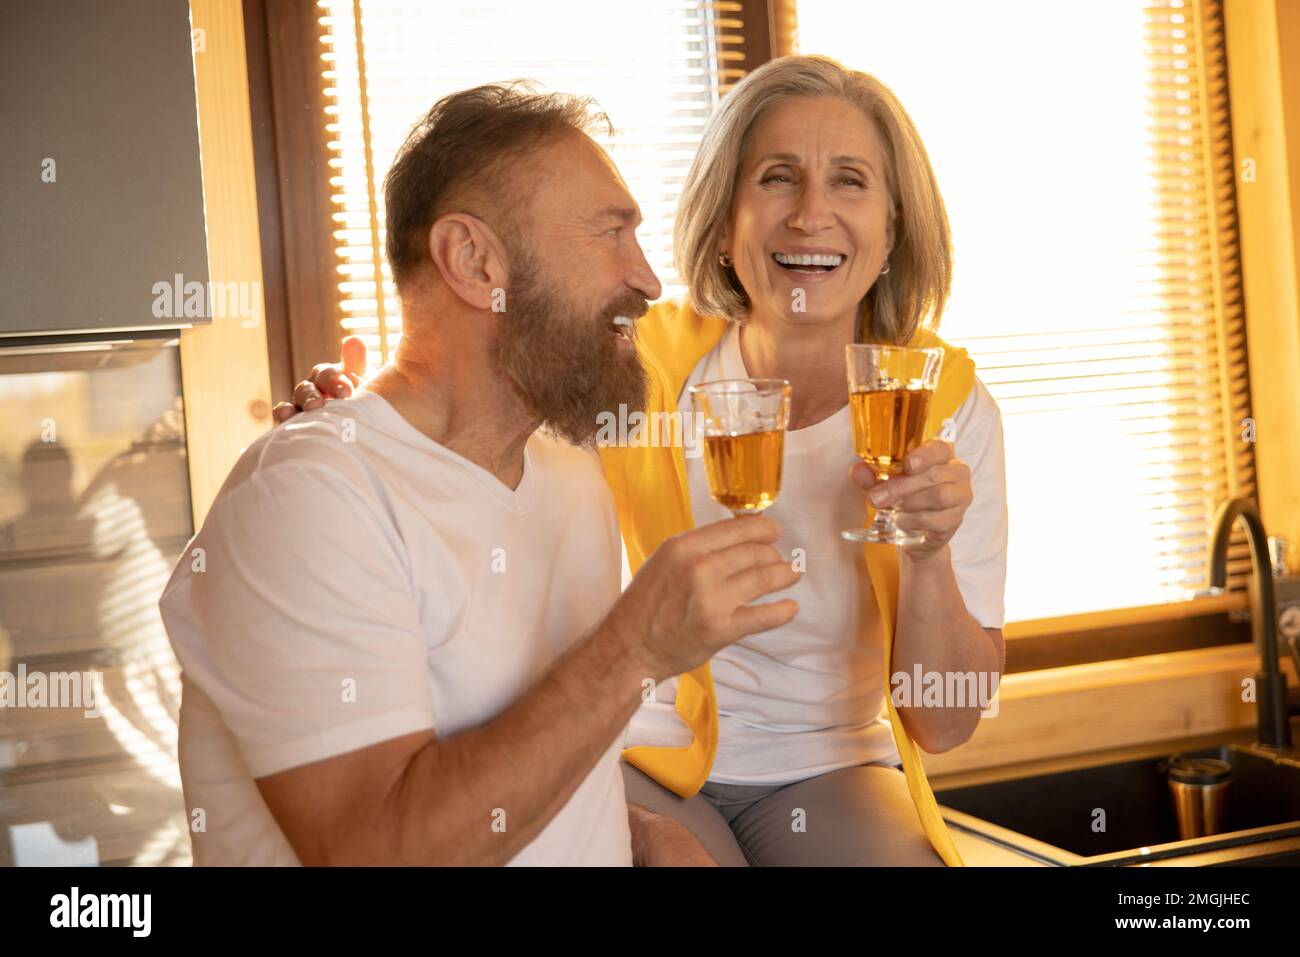 Married couple looking enjoyed and happy while having a glass of wine Stock Photo